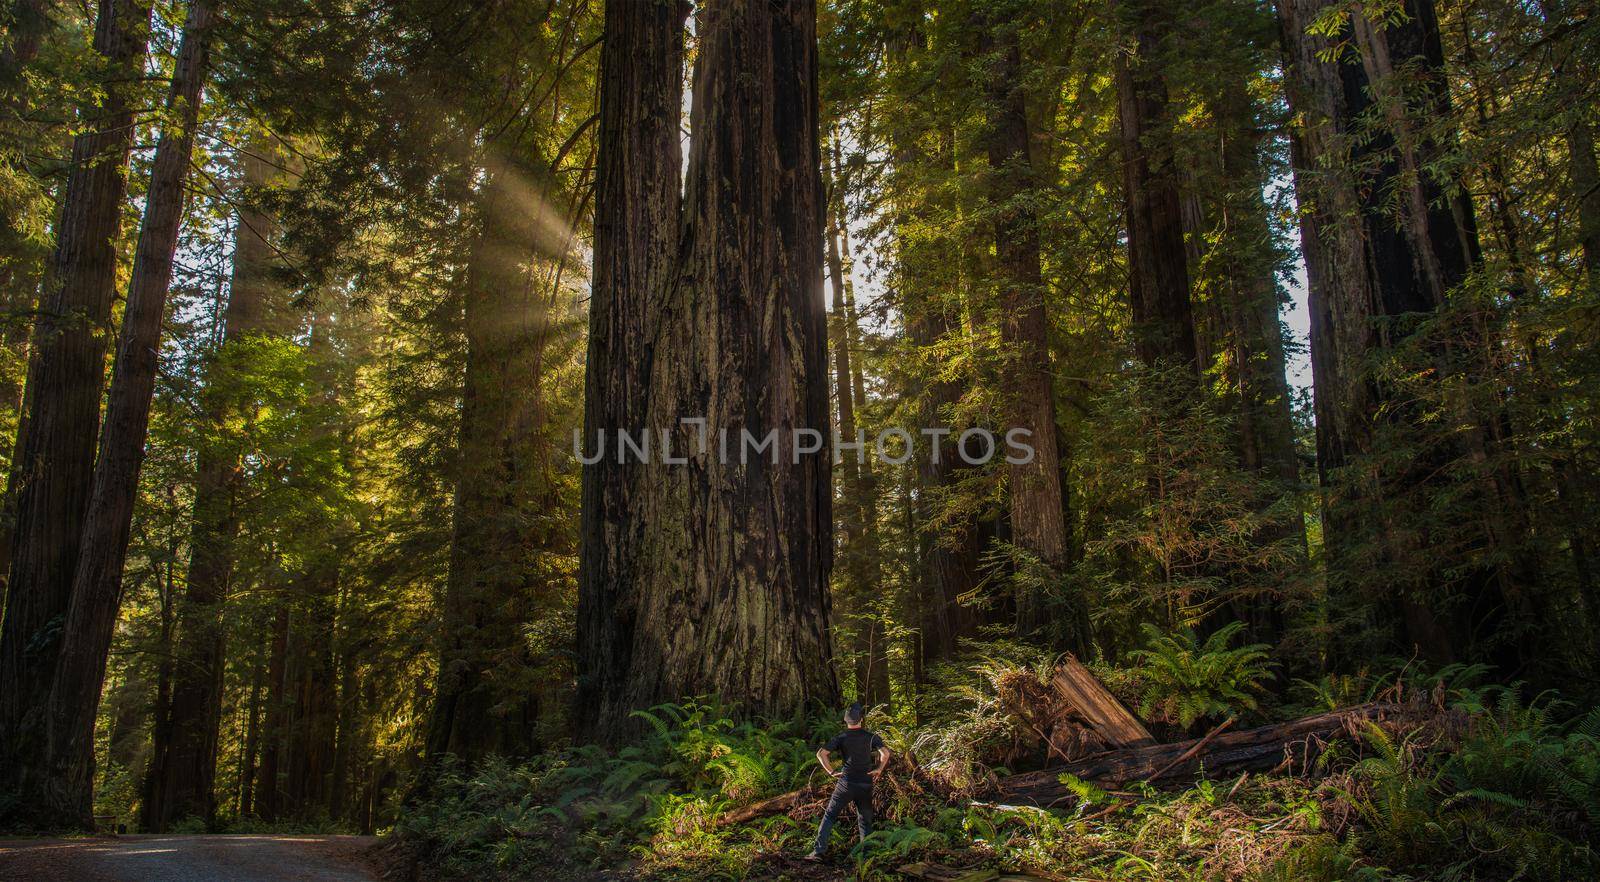 Caucasian Hiker in Front of Ancient Sequoioideae Redwood Tree in Northern California Redwood National Park, United States of America.